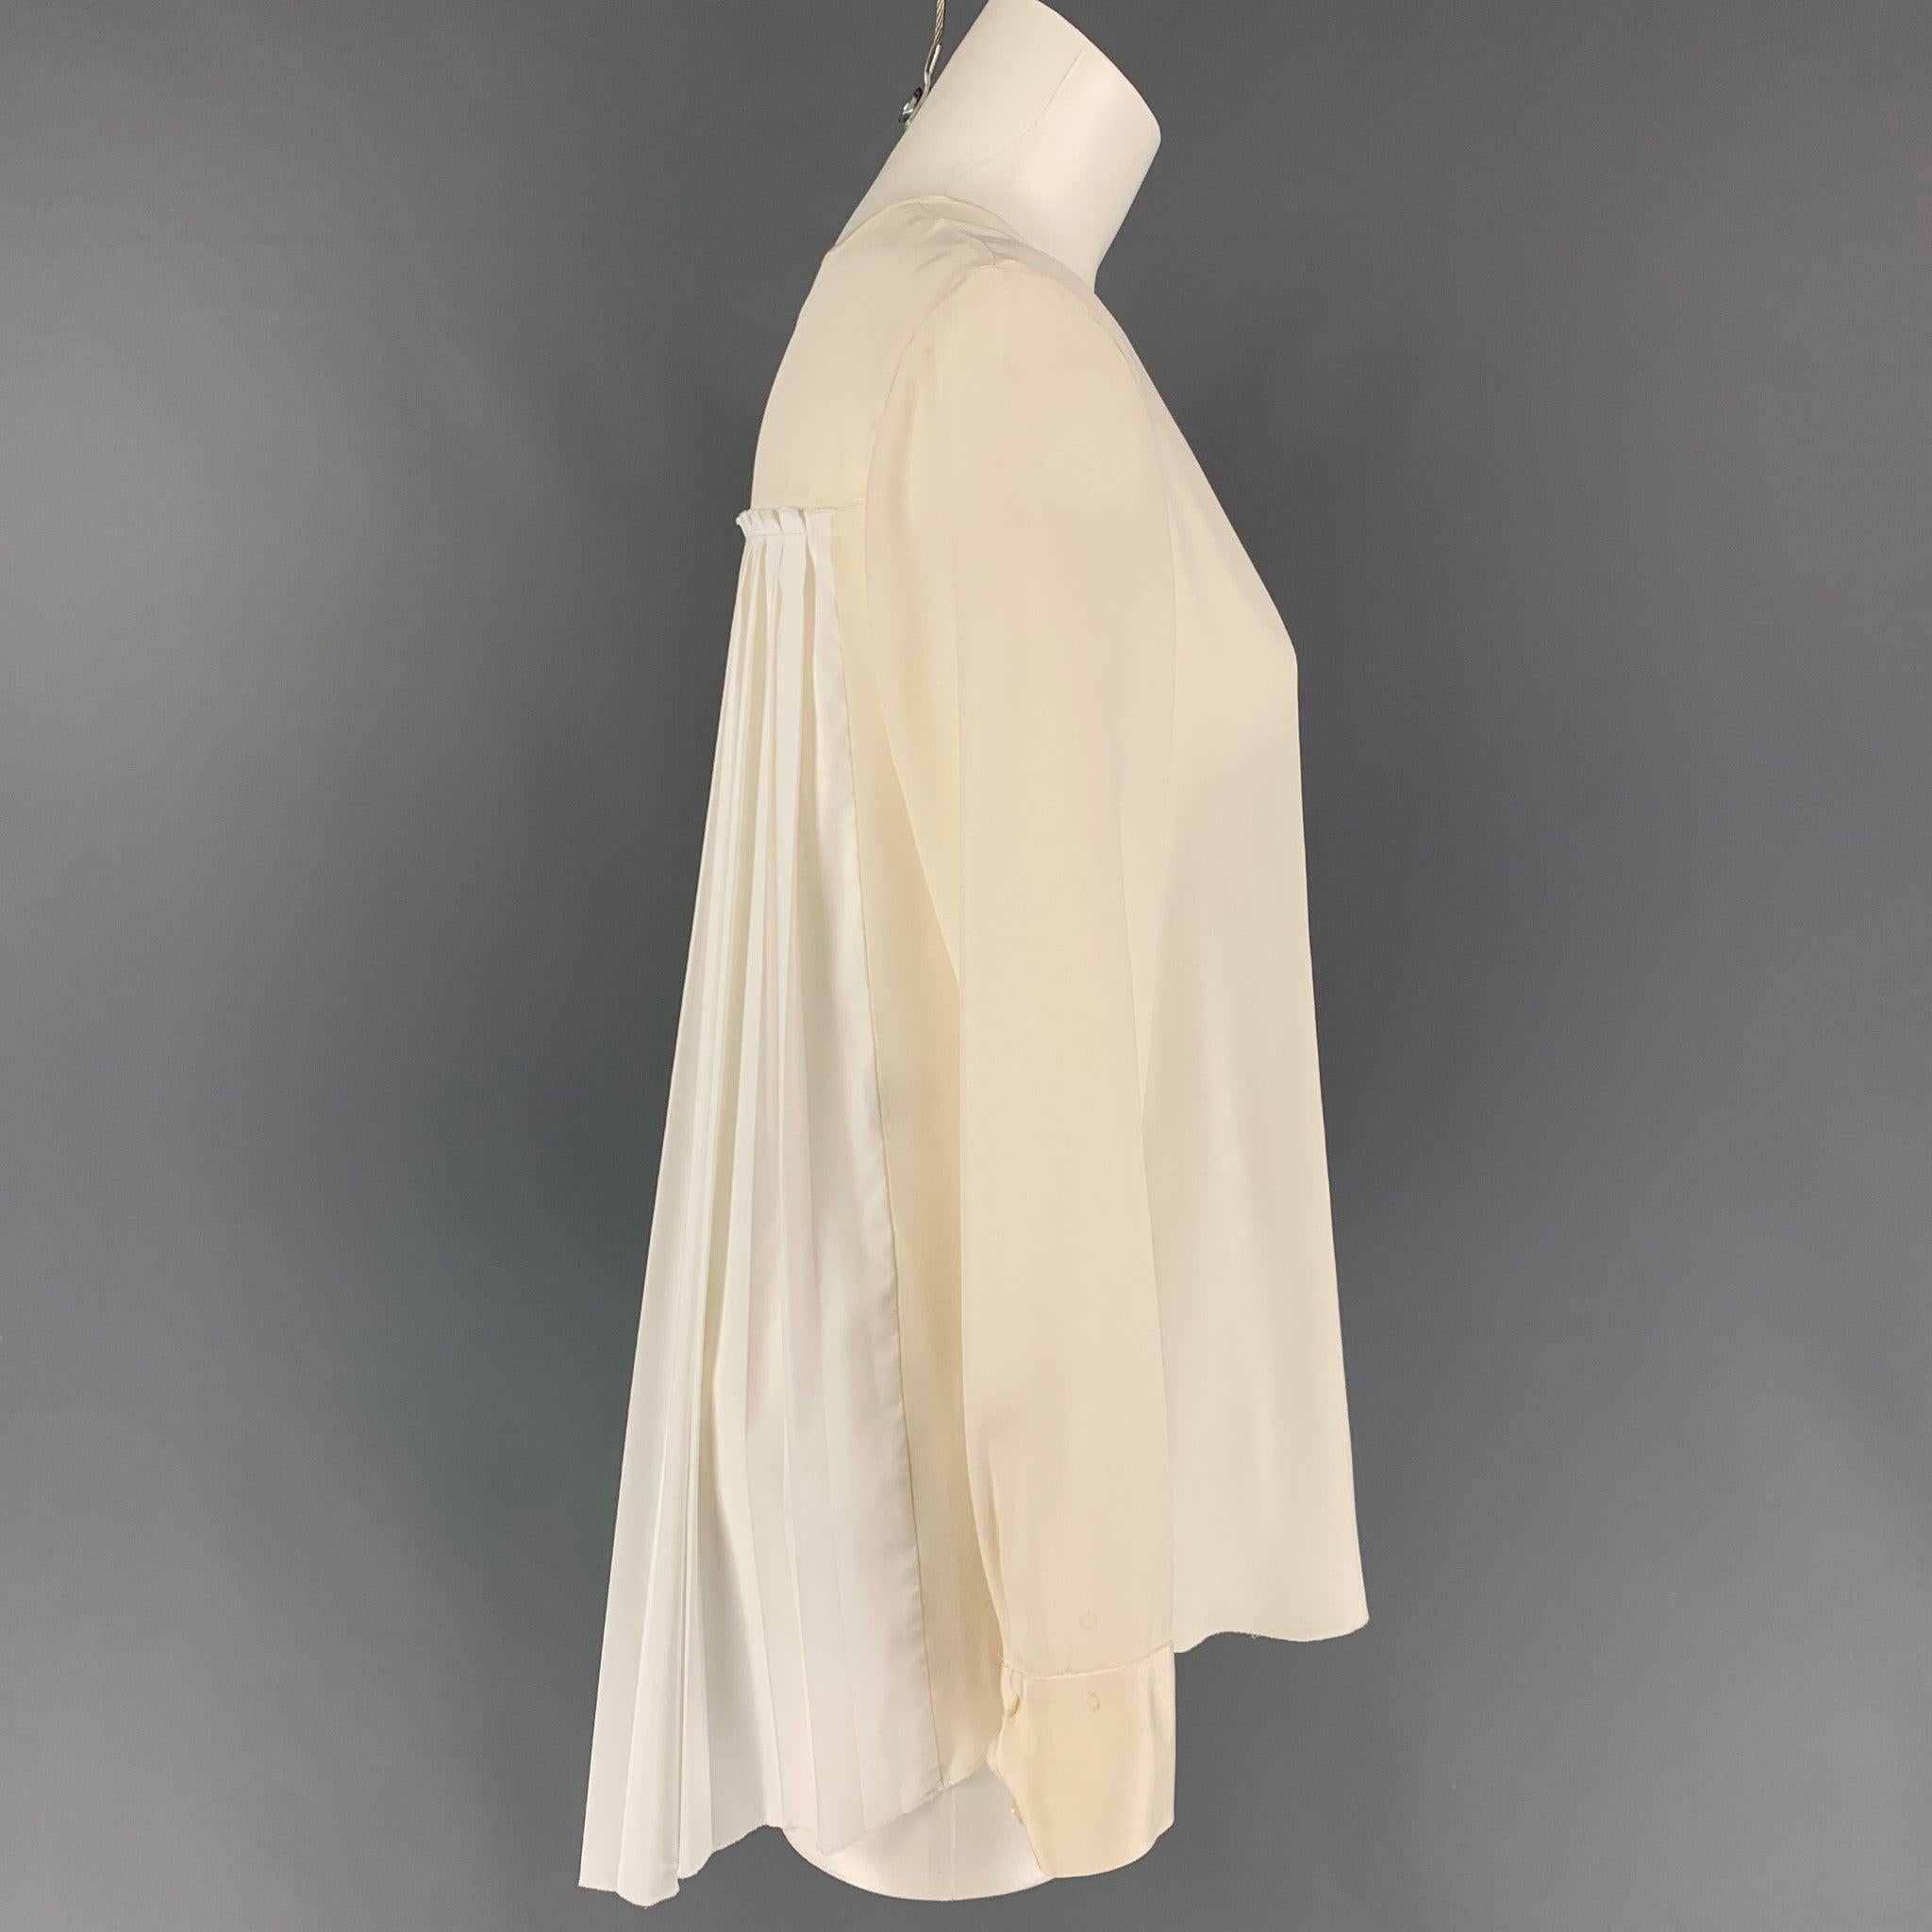 DEREK LAM long sleeve blouse comes in a cream & white silk collarless, pleated back, and a hidden placket closure.
Good
Pre-Owned Condition. Discoloration at sleeve cuff. 

Marked:   40 

Measurements: 
 
Shoulder: 15.5 inches  Bust: 38 inches 